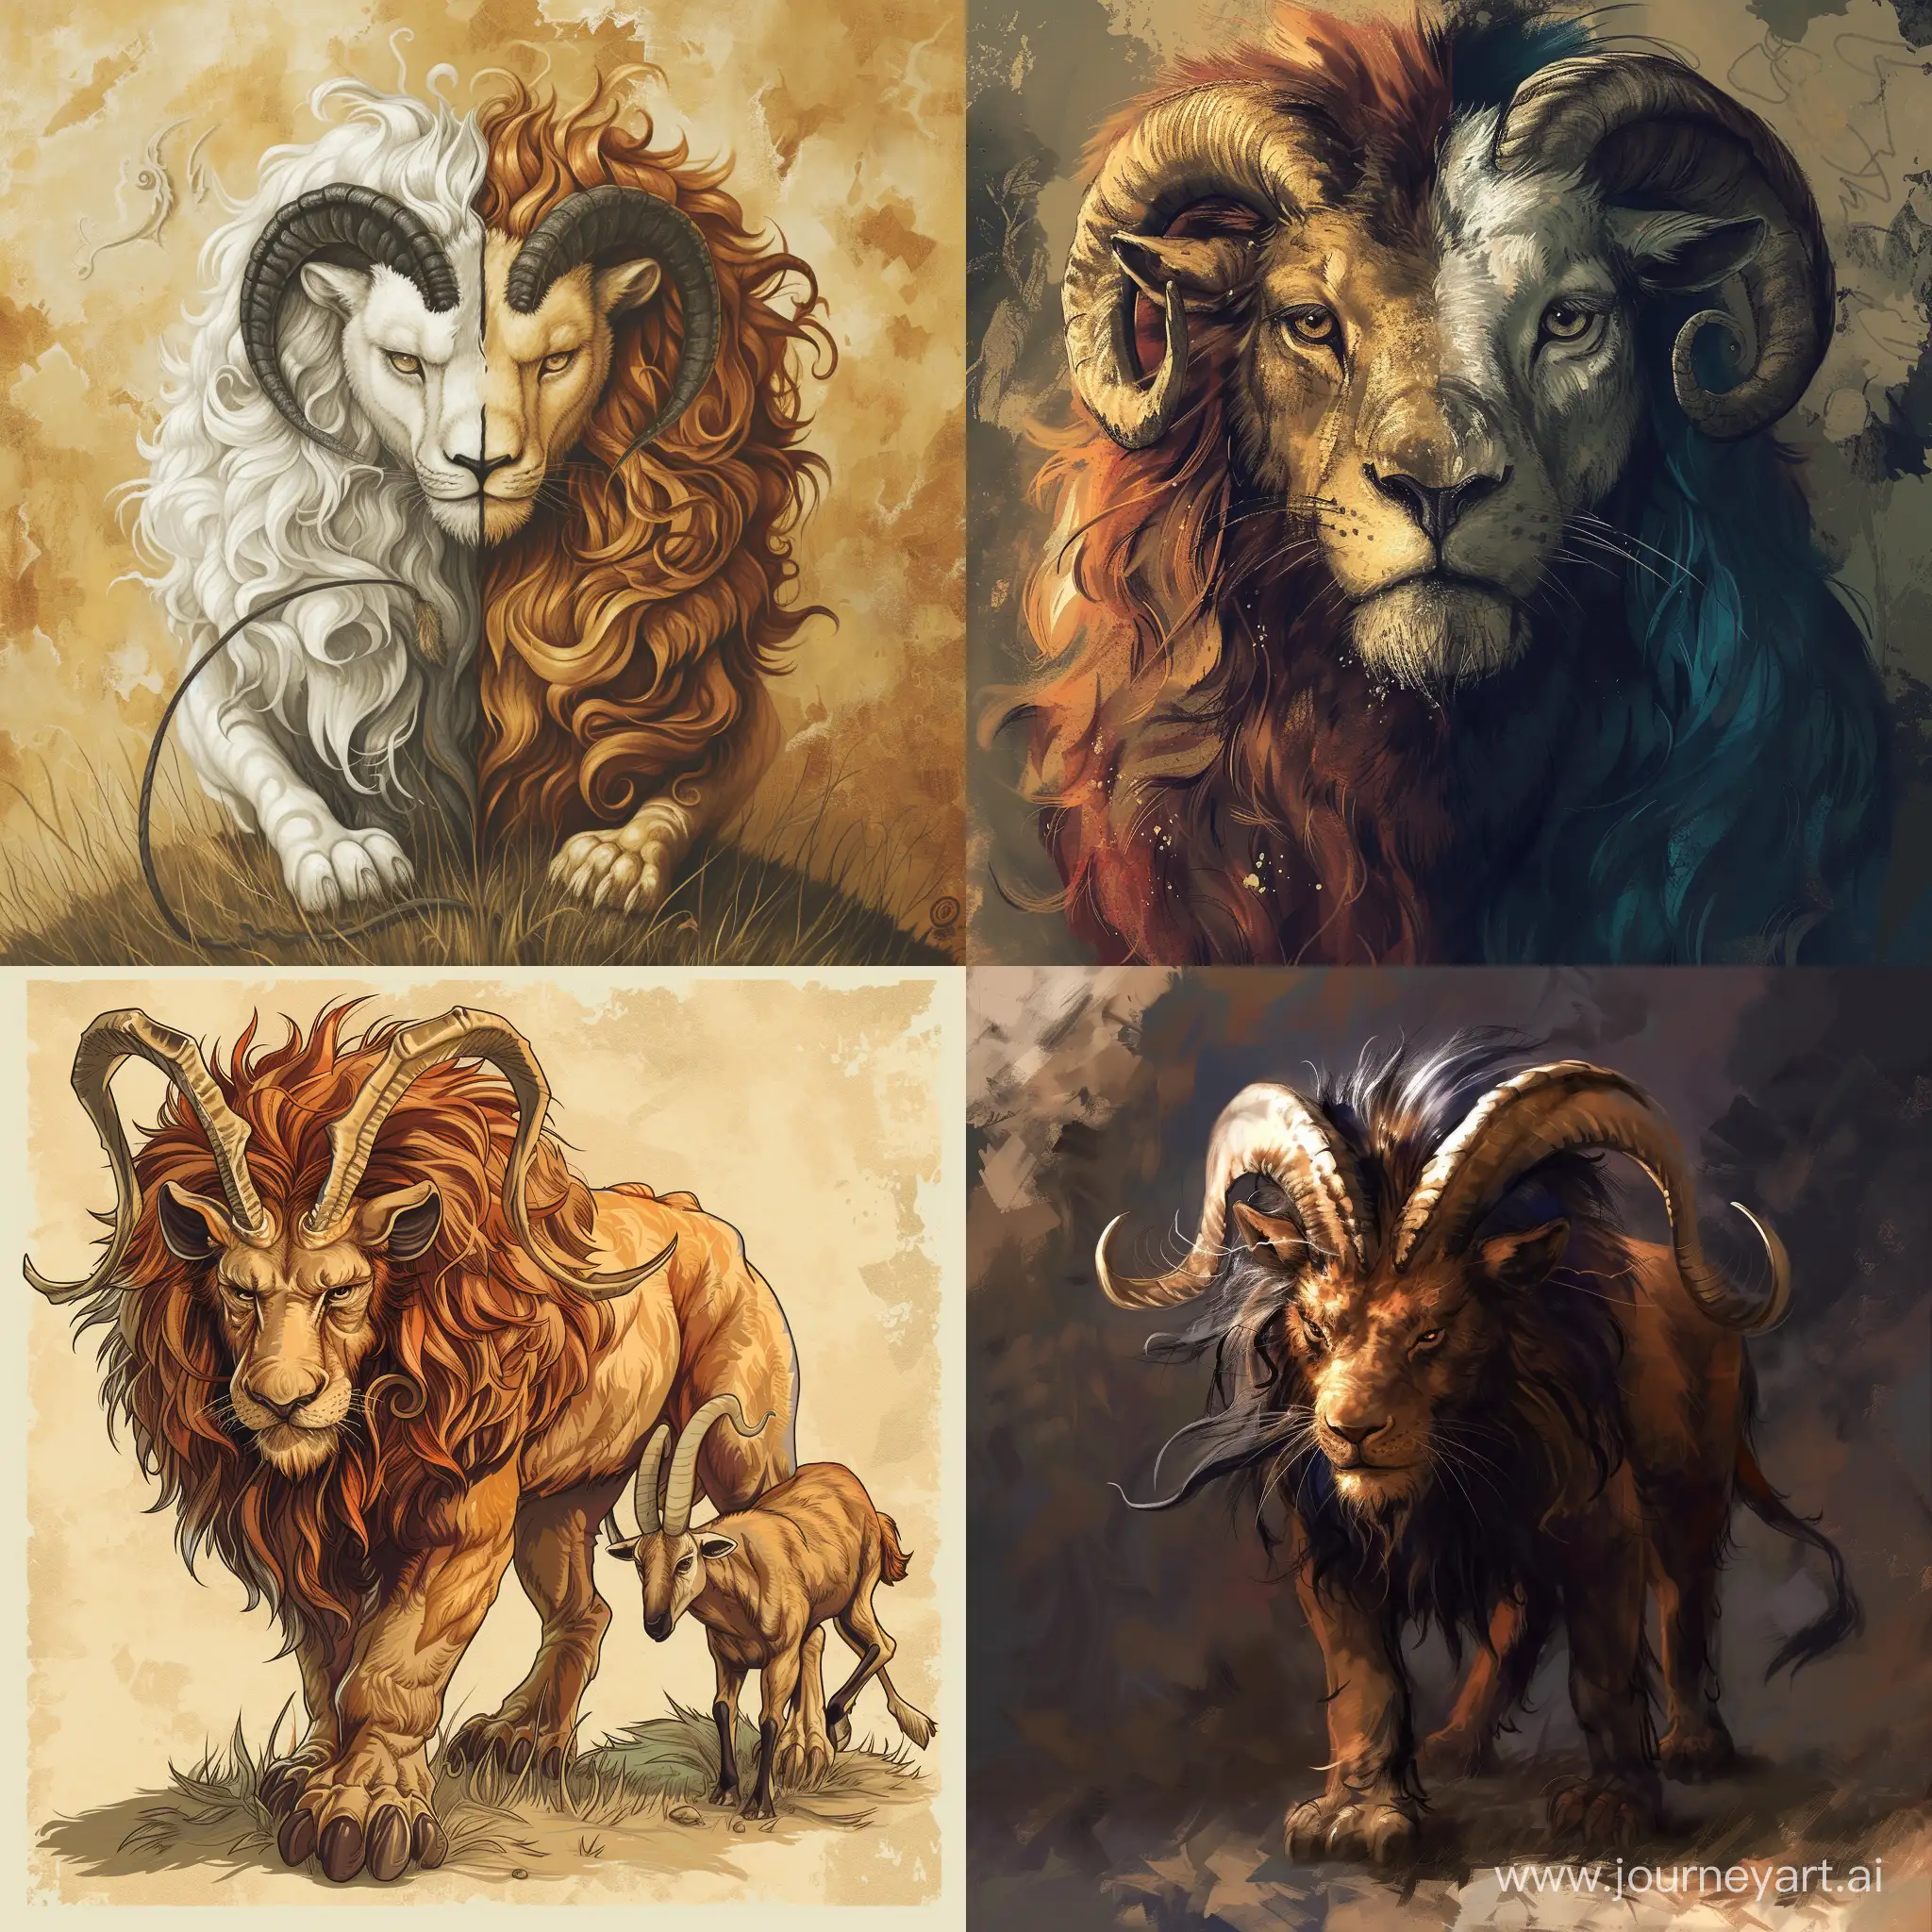 Majestic-Chimera-Mythical-Fusion-of-Lion-and-Goat-Captured-in-Stunning-Image